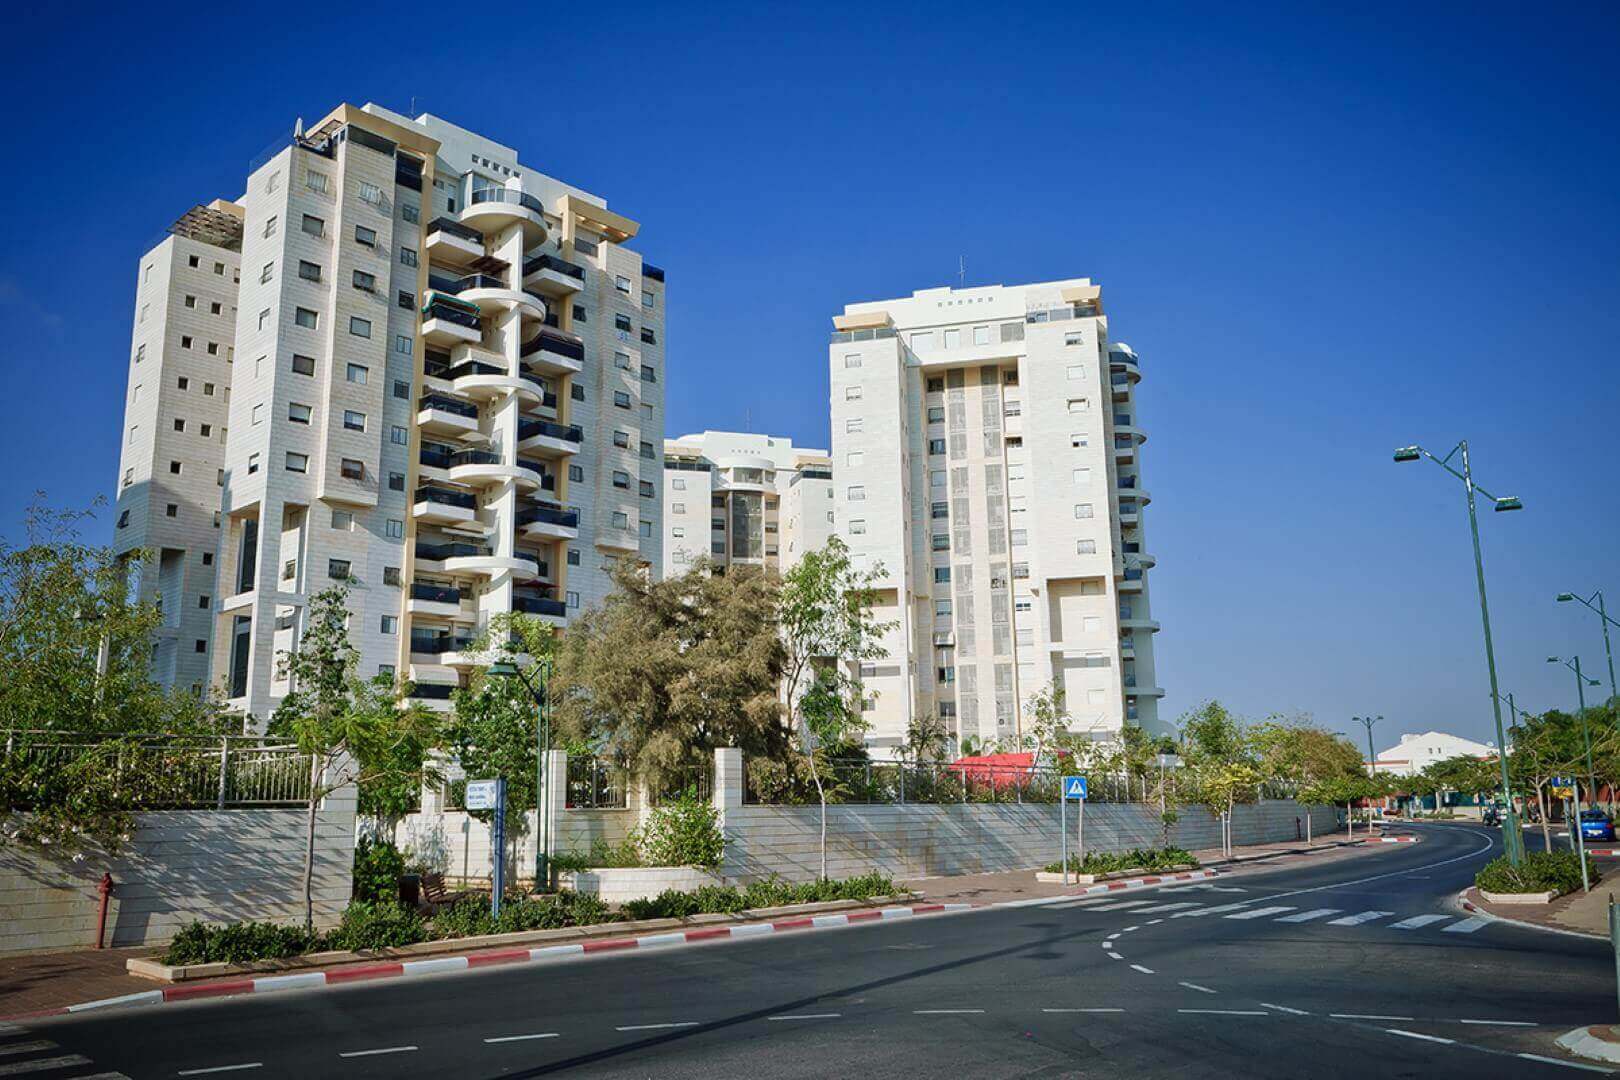 Photo of a building of the Kiryat Nobel laureate project in Rishon Lezion